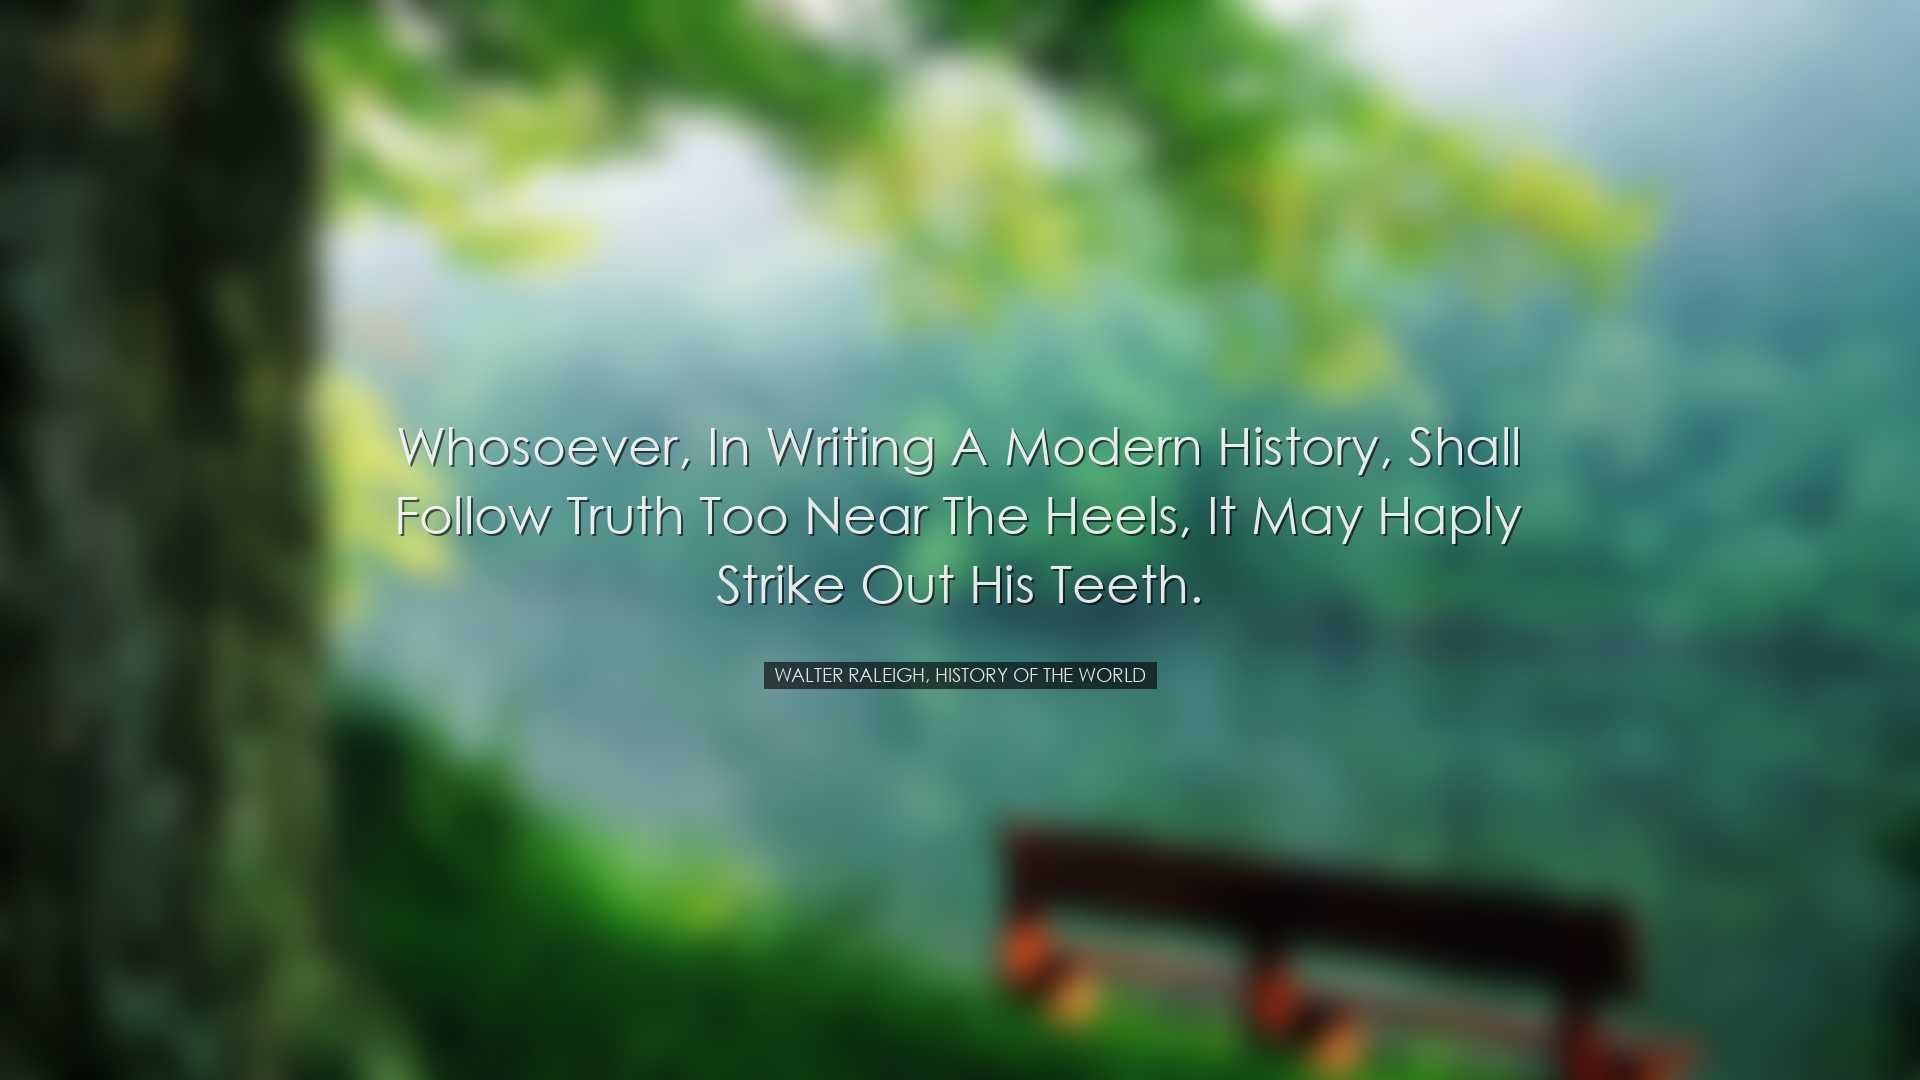 Whosoever, in writing a modern history, shall follow truth too nea